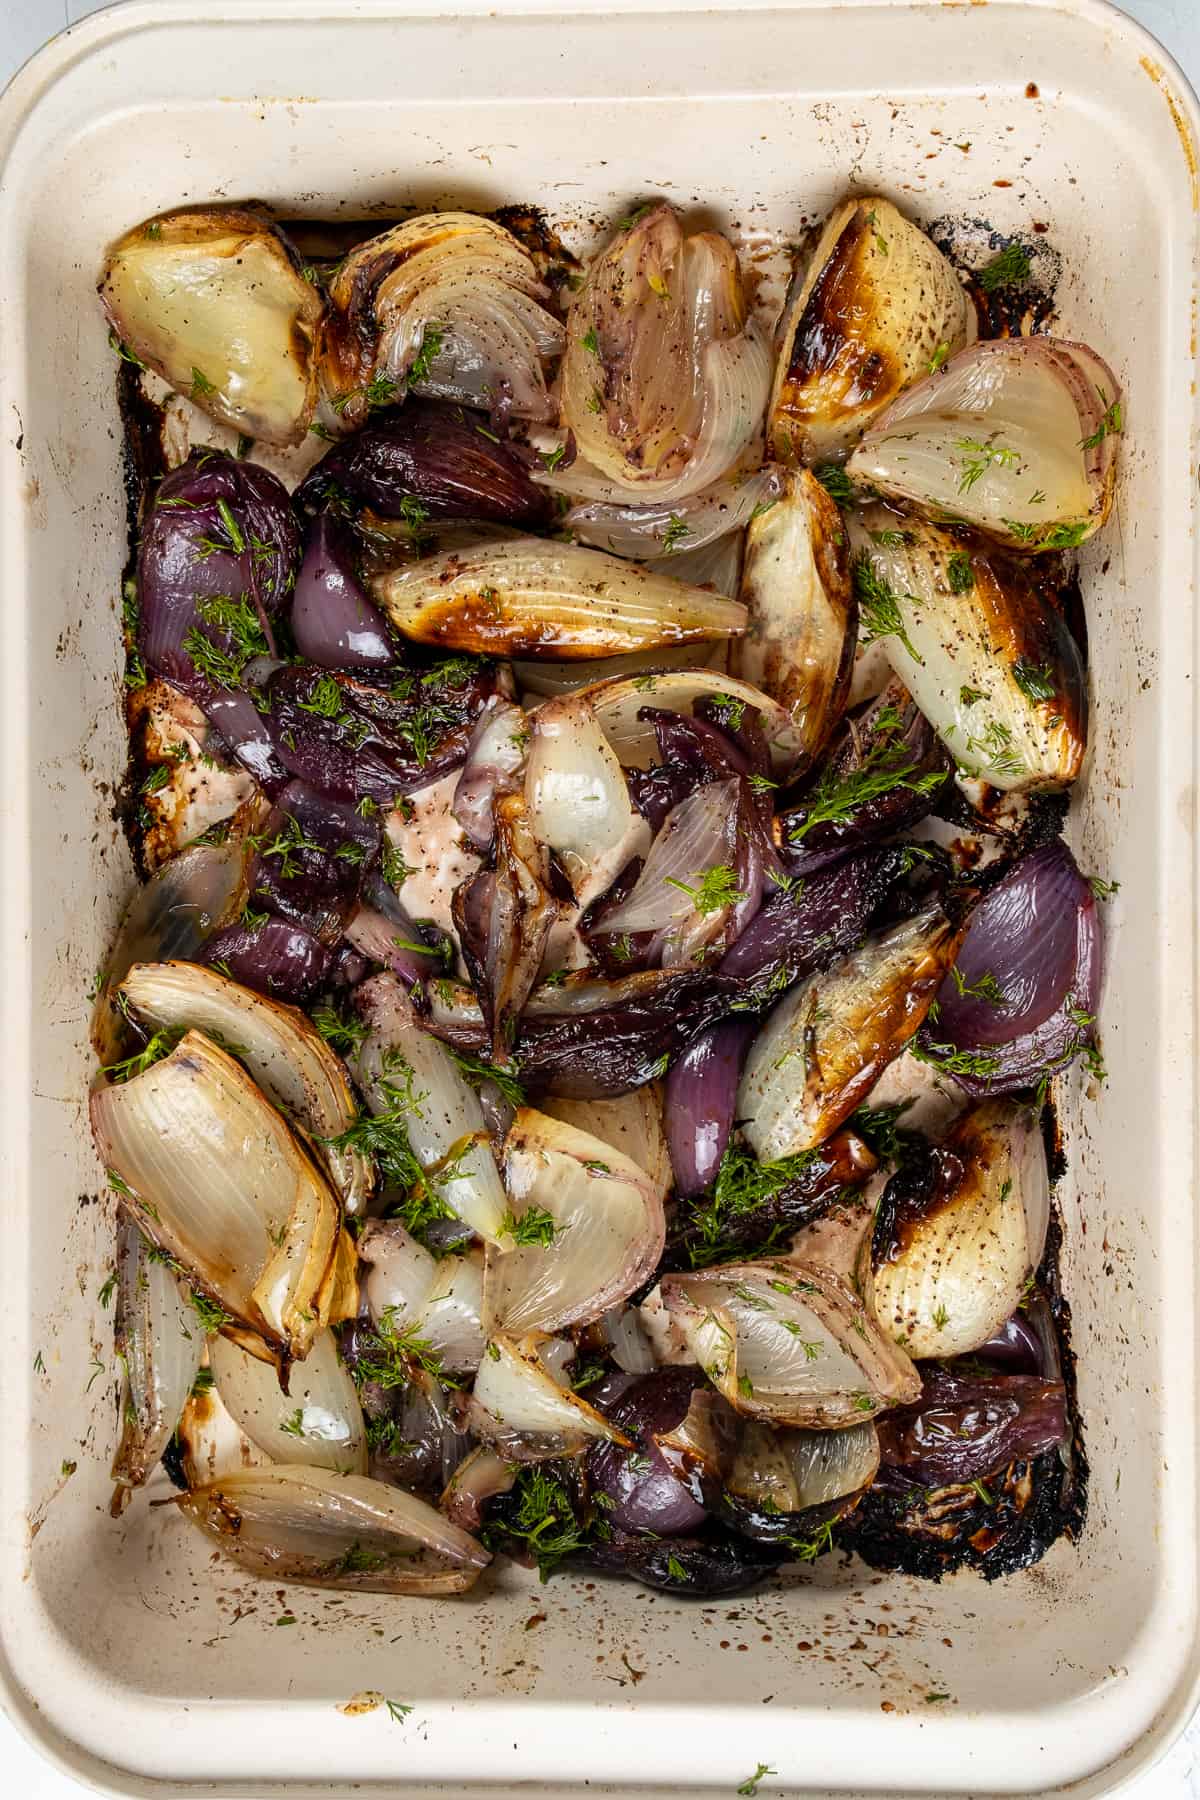 Baked red and white onion wedges combined with fresh dill, sumac, olive oil and pomegranate molasses in a white baking dish.